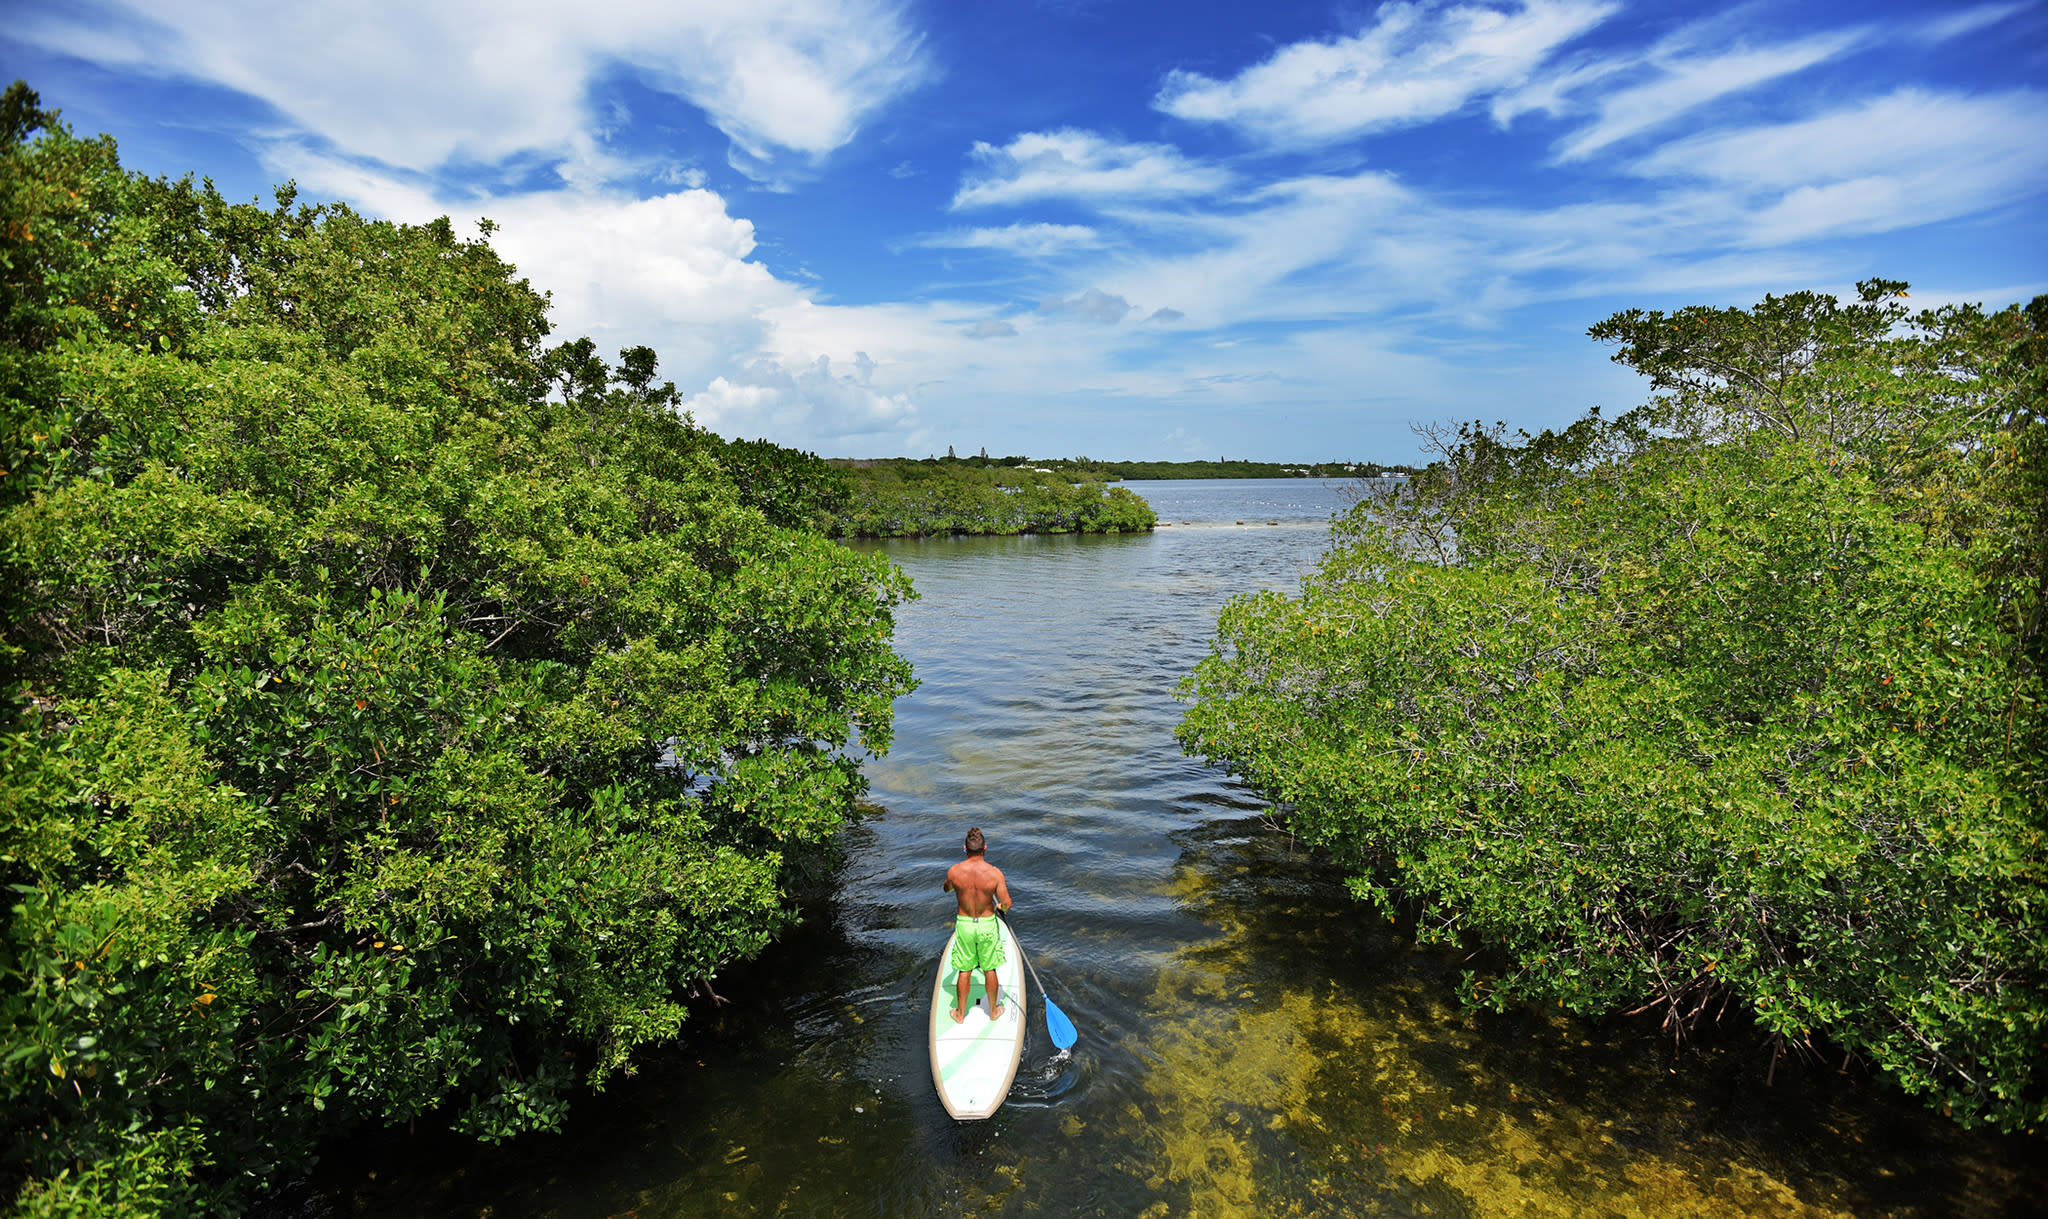 A paddleboarder paddling through the mangroves of John Pennekamp Coral Reef State Park in Key Largo